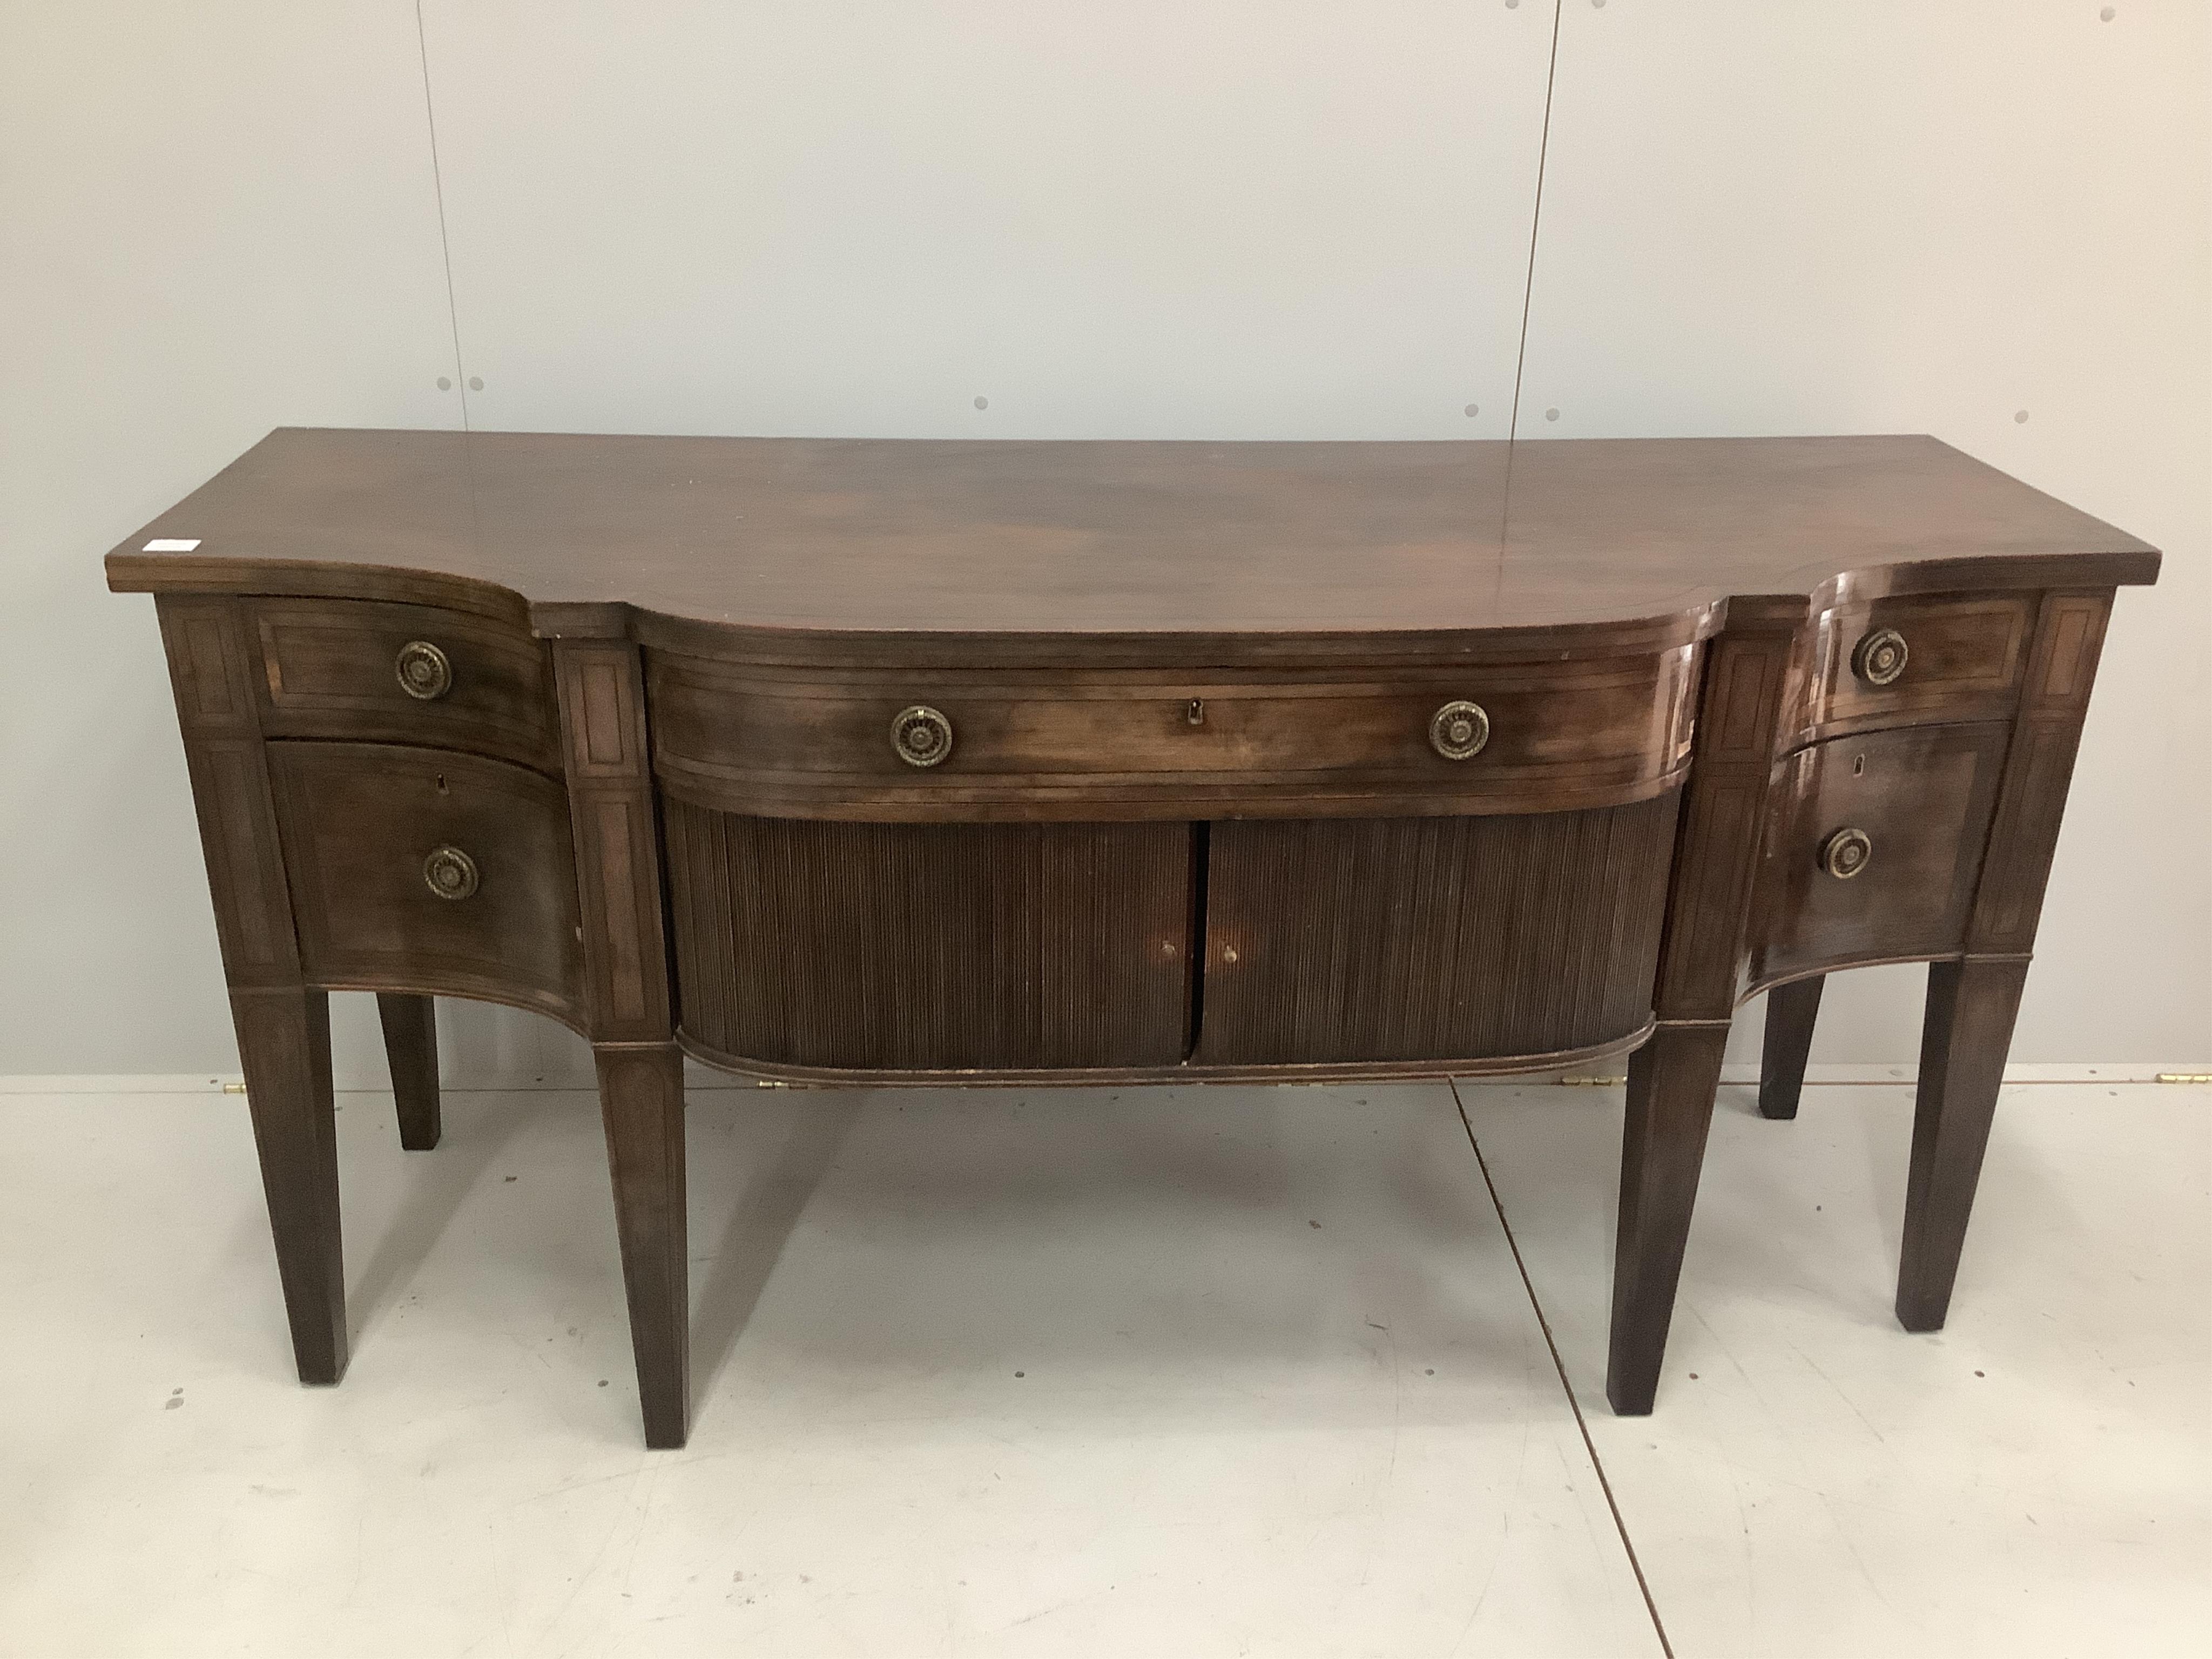 A George III mahogany bow front sideboard, width 183cm, depth 69cm, height 88cm. Condition - fair